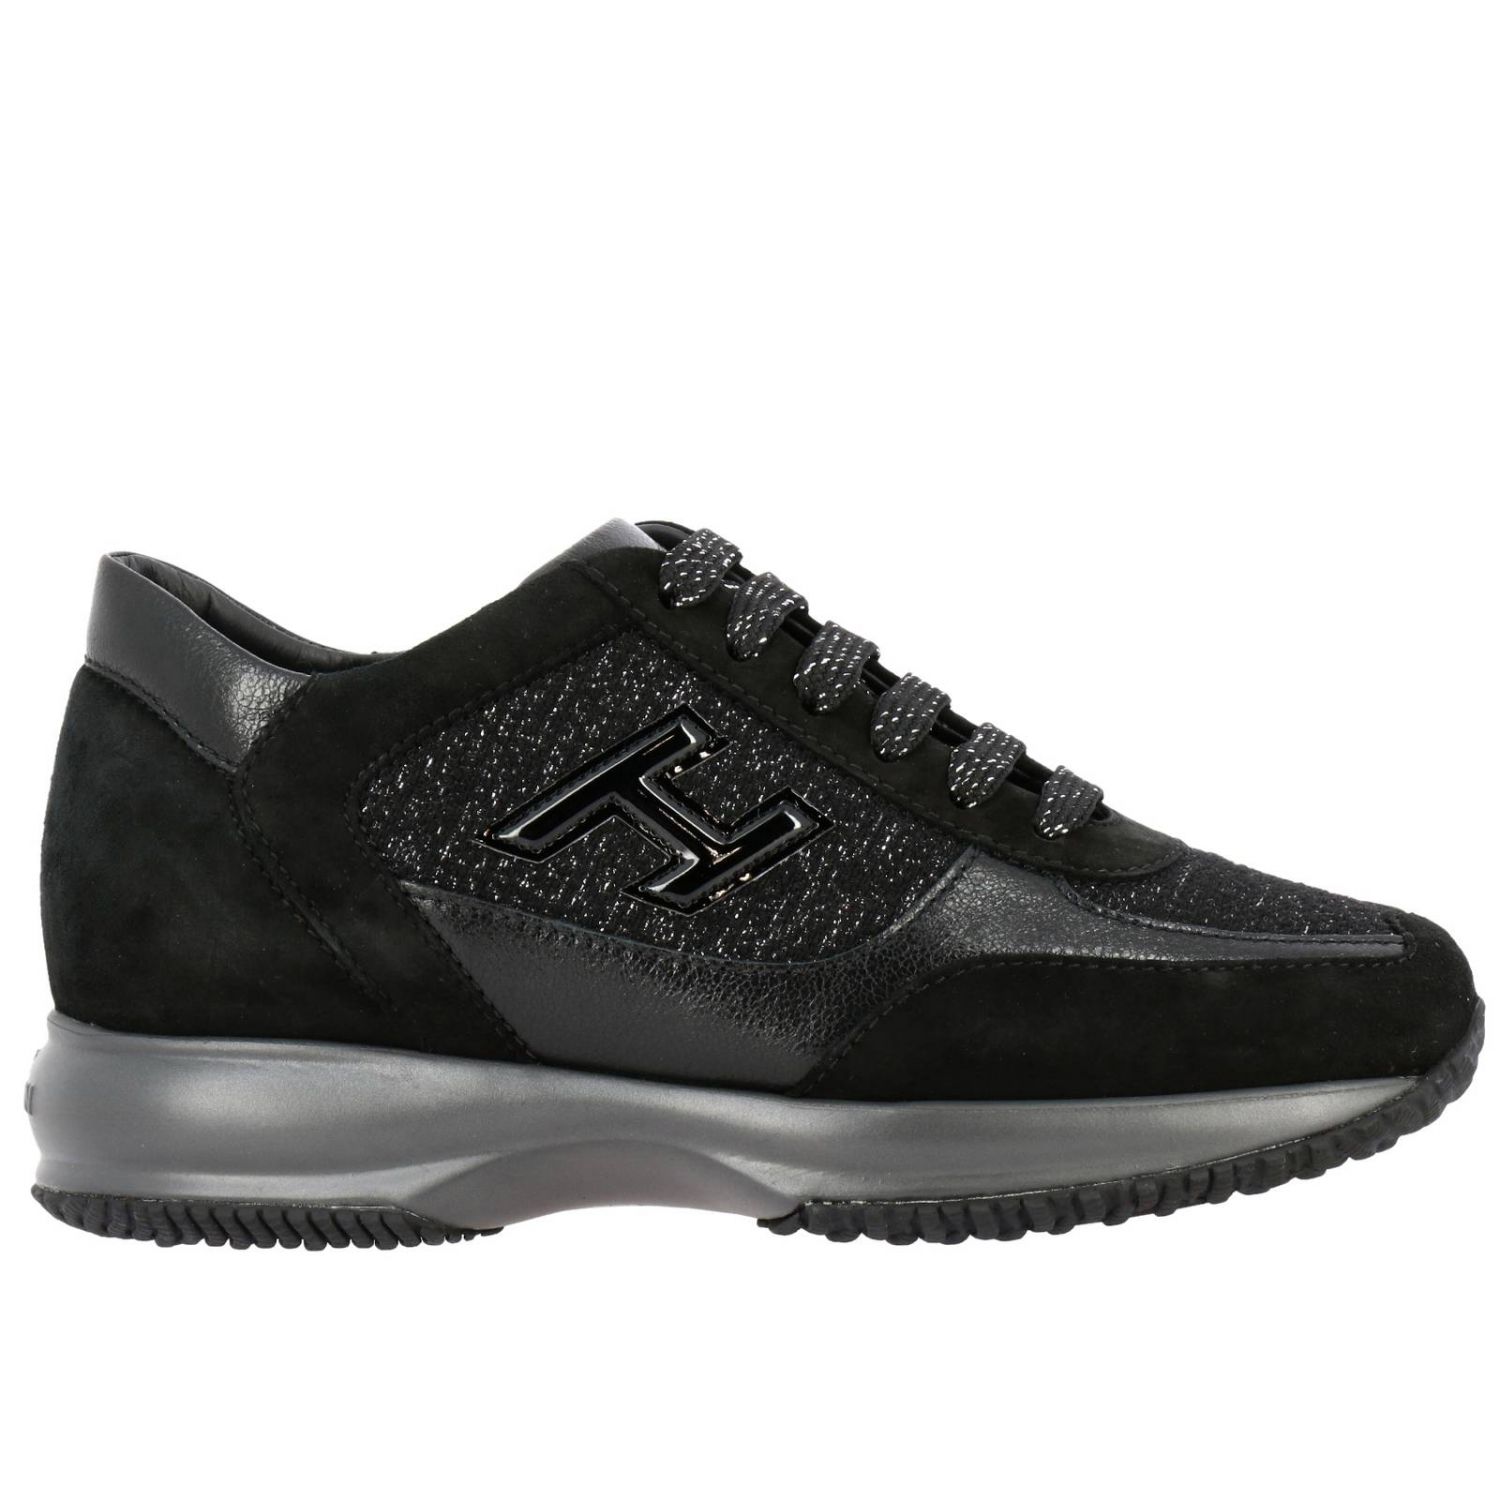 Hogan Outlet: Interactive sneakers in suede leather and lurex fabric ...